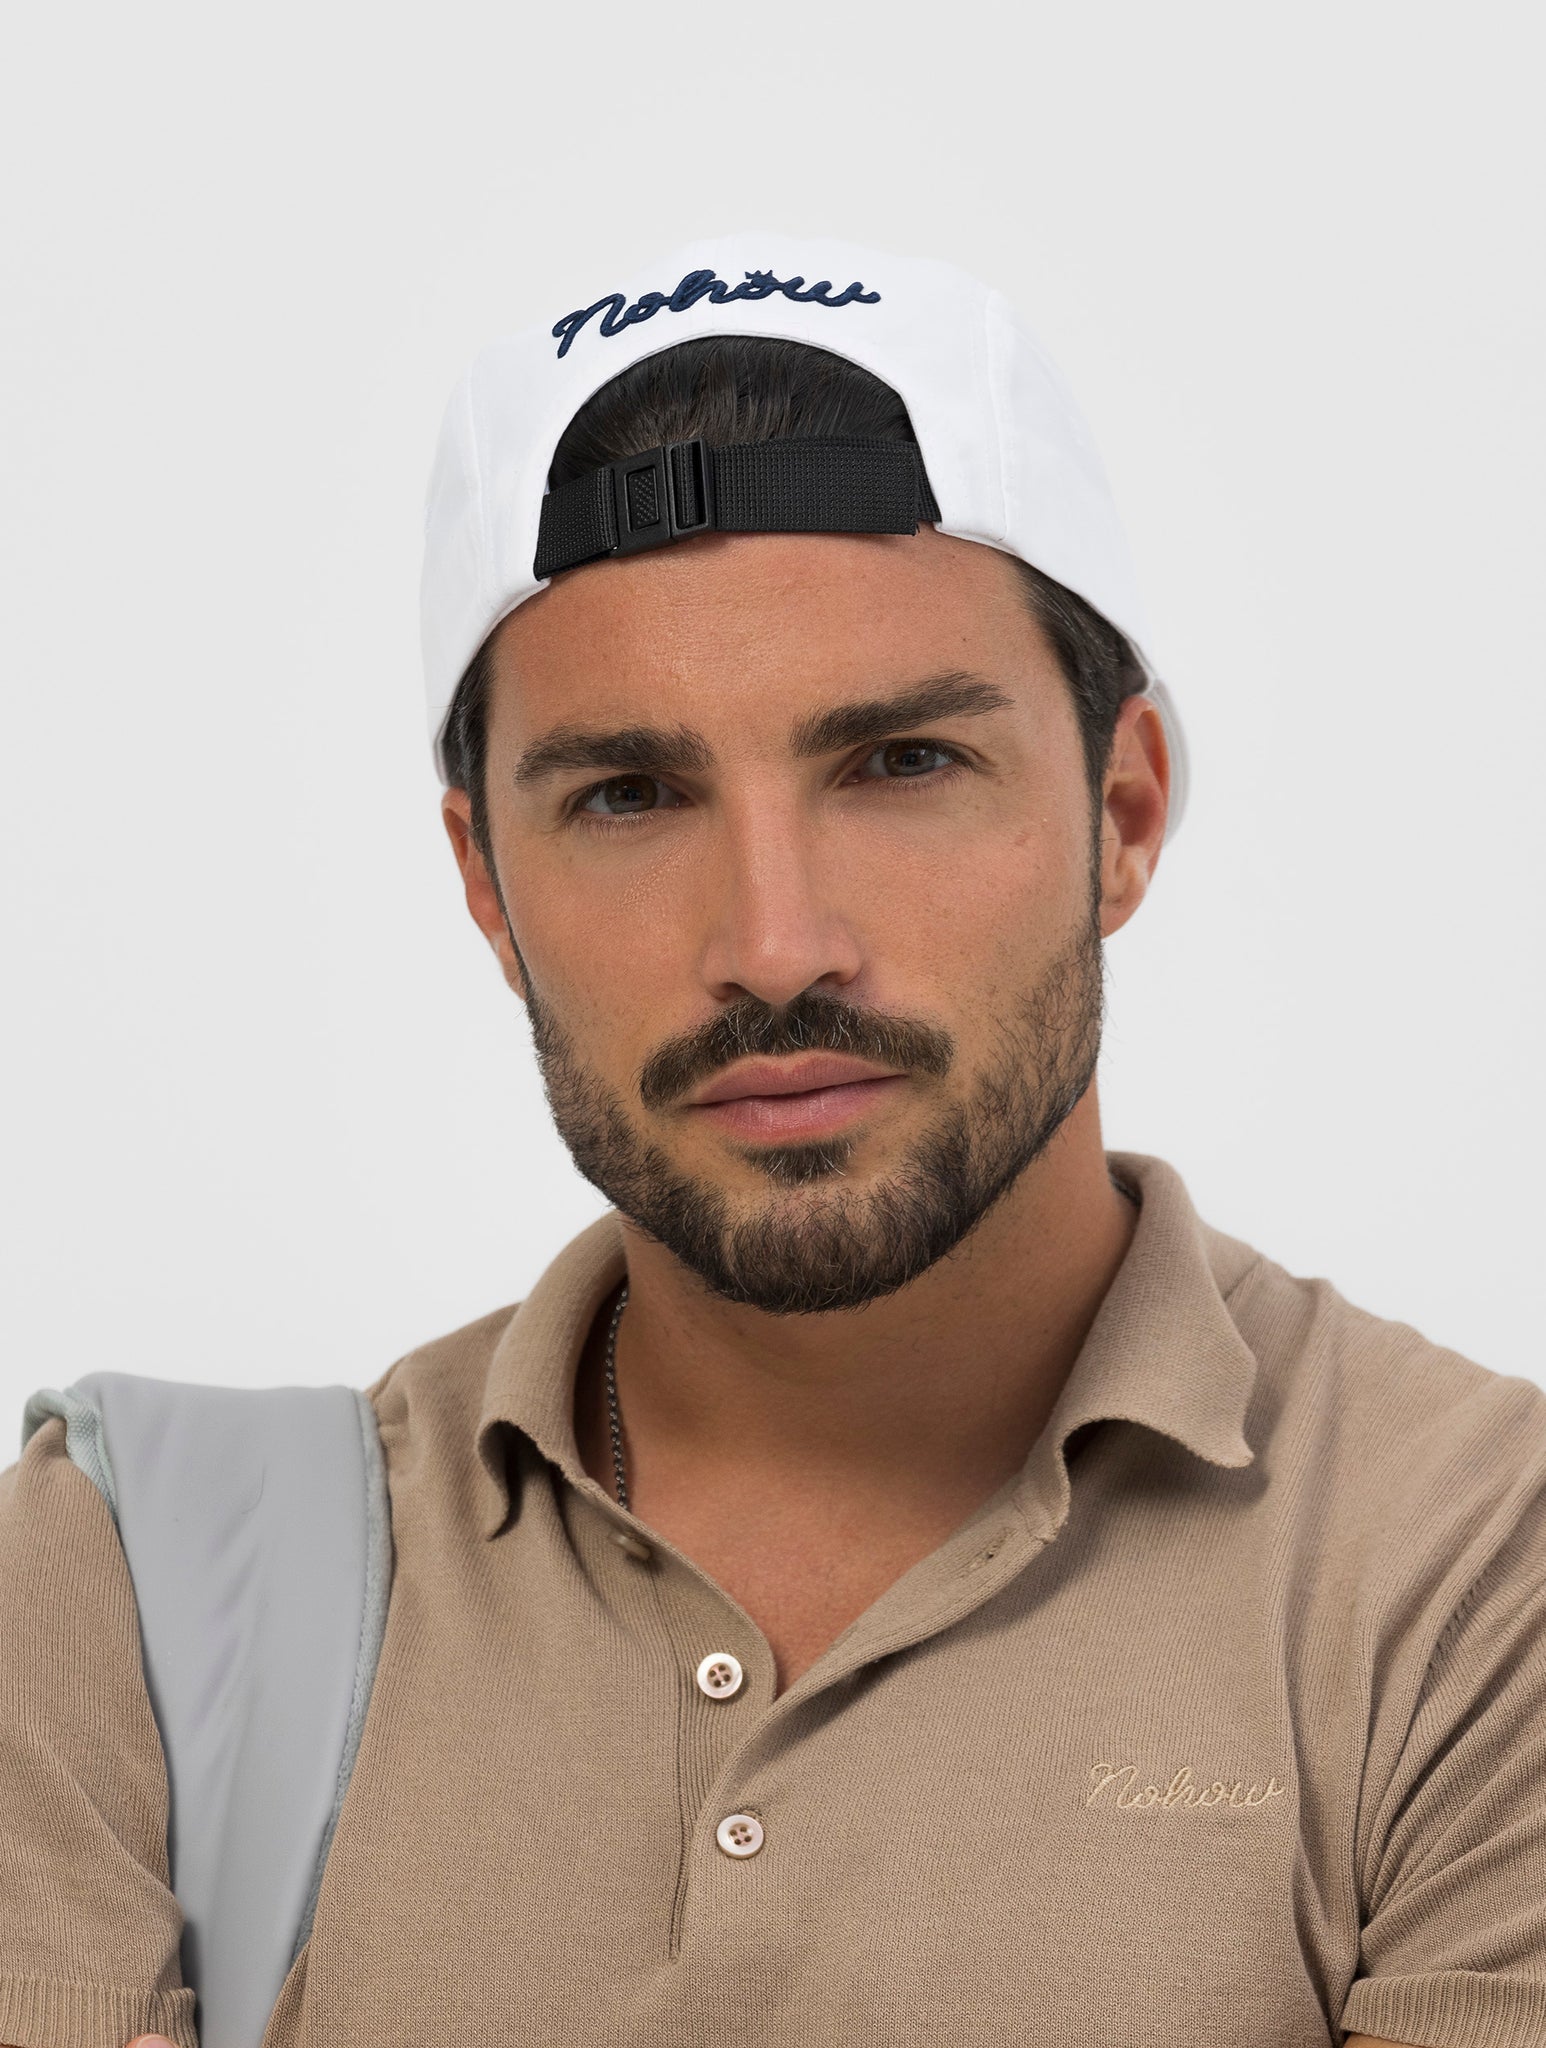 NOHOW GOLF HAT IN WHITE